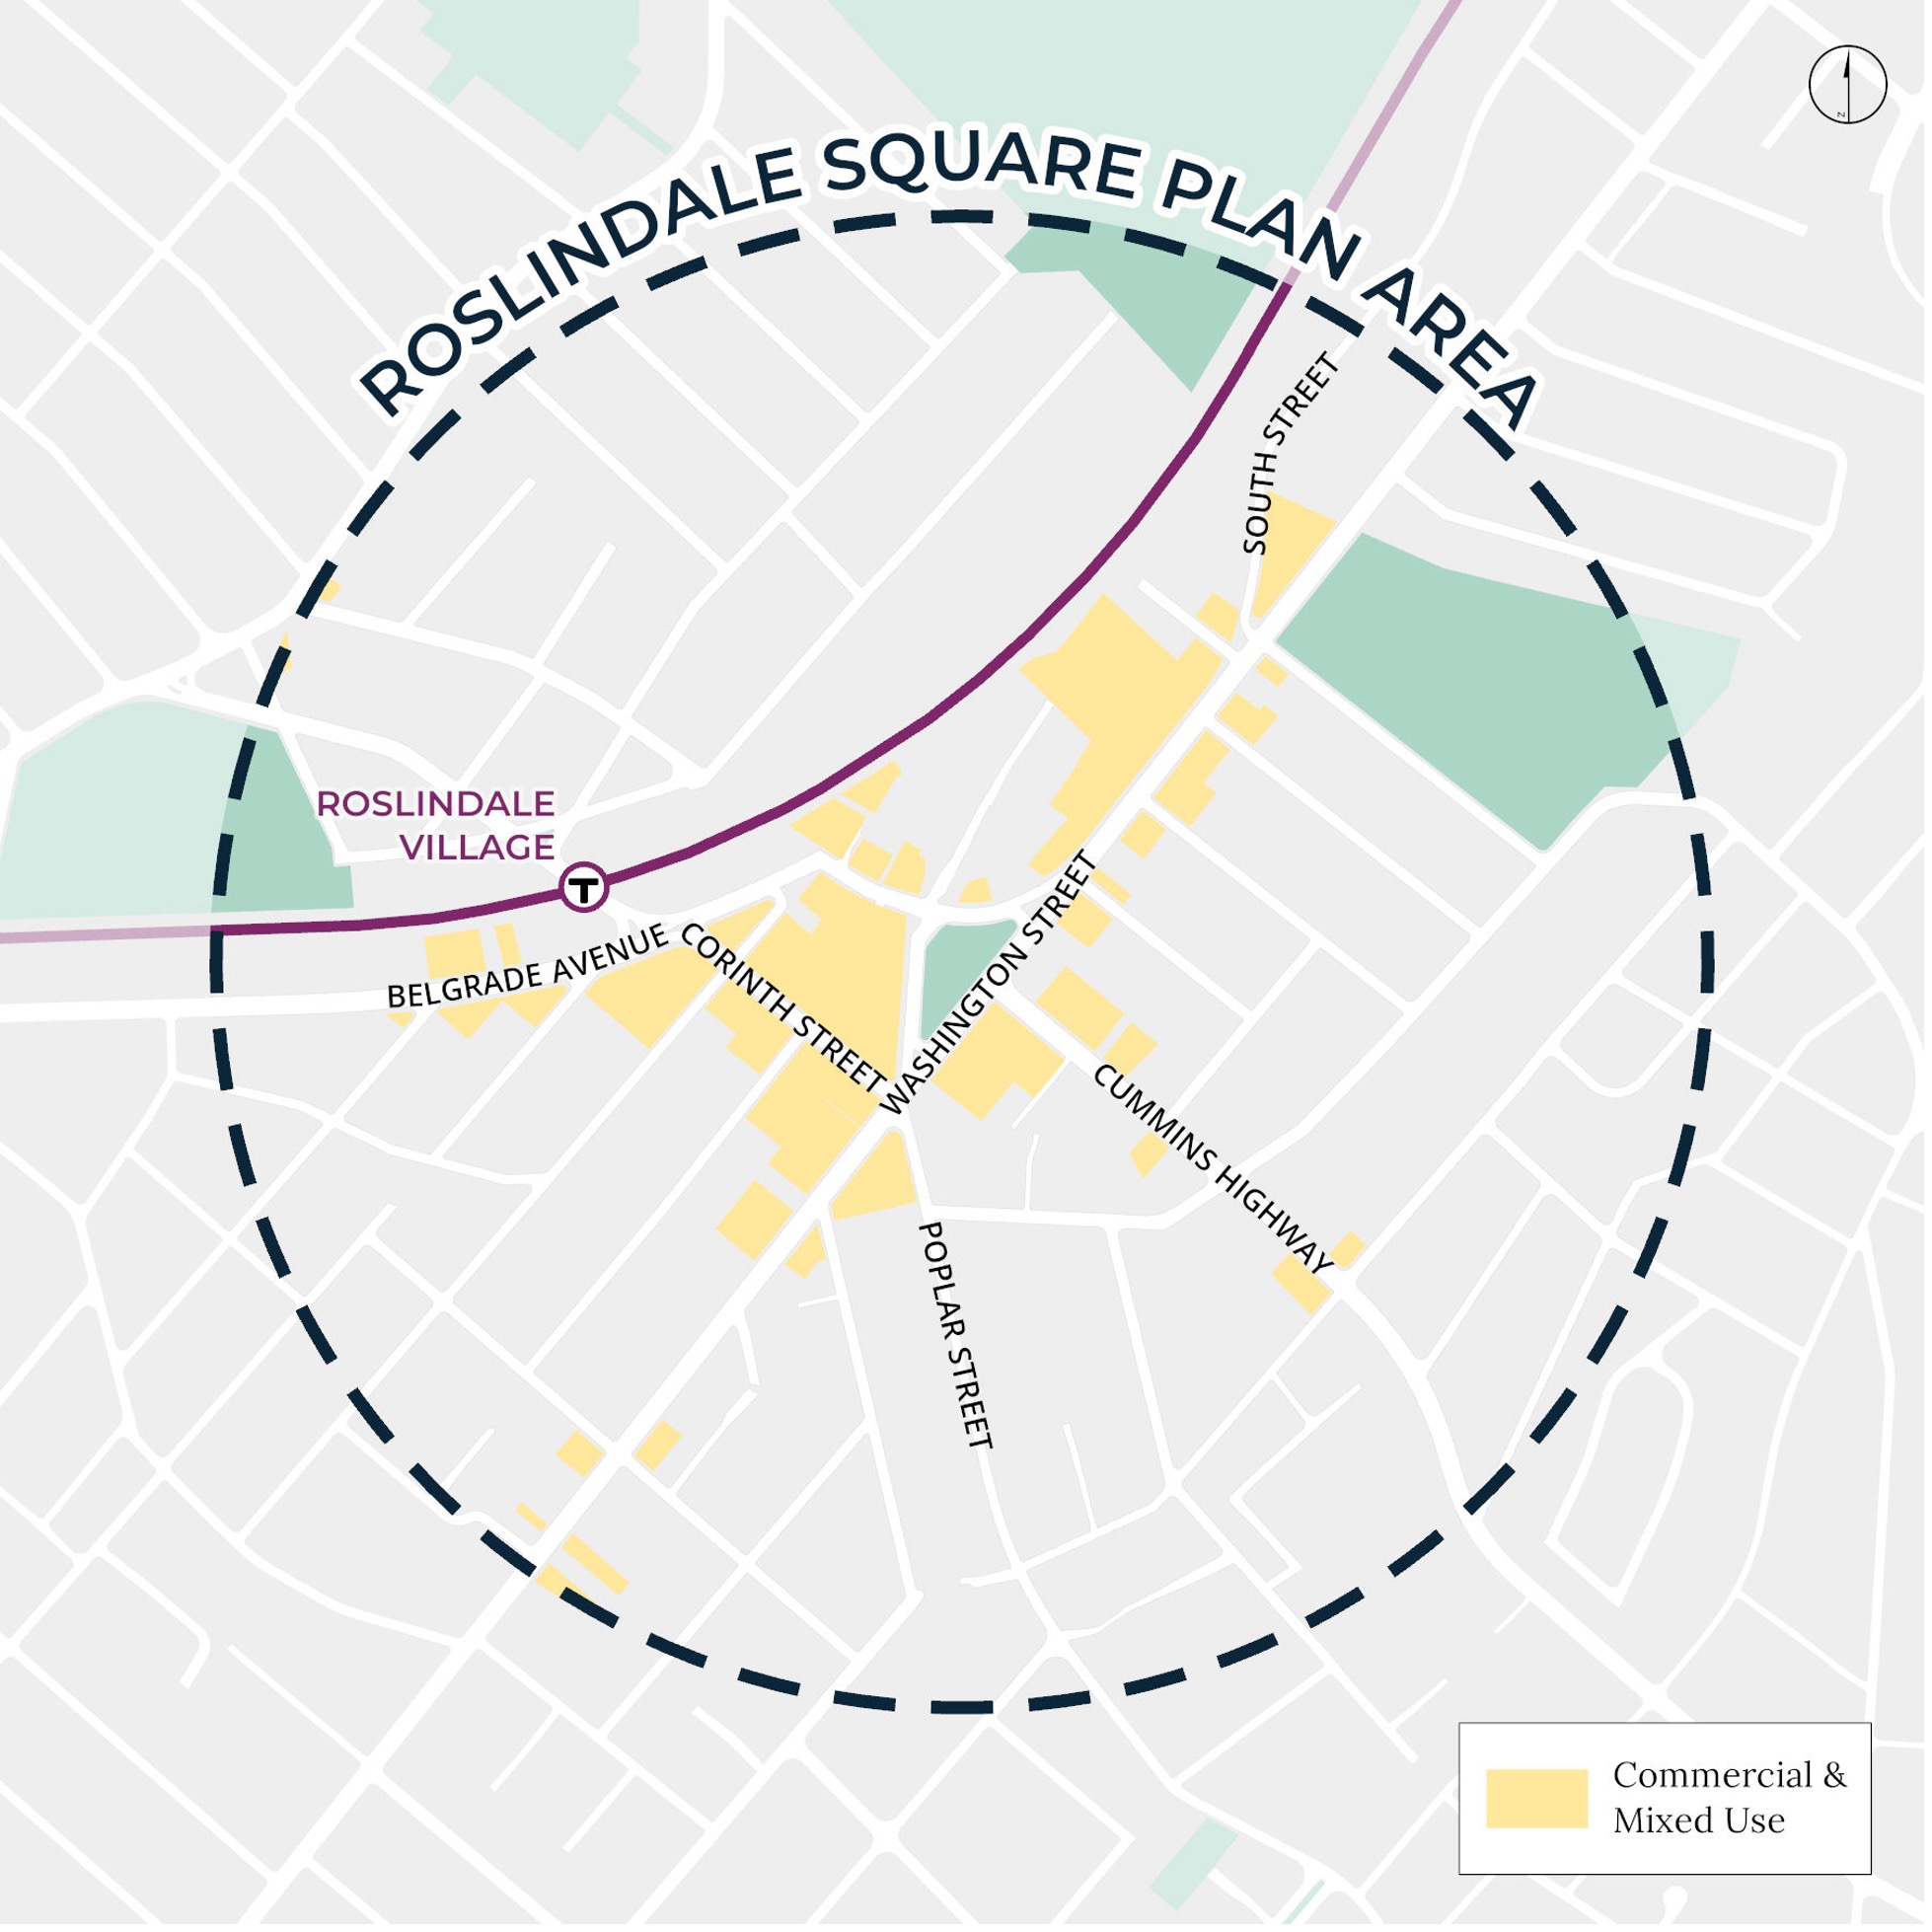 Map of the Roslindale Square plan area in Boston.